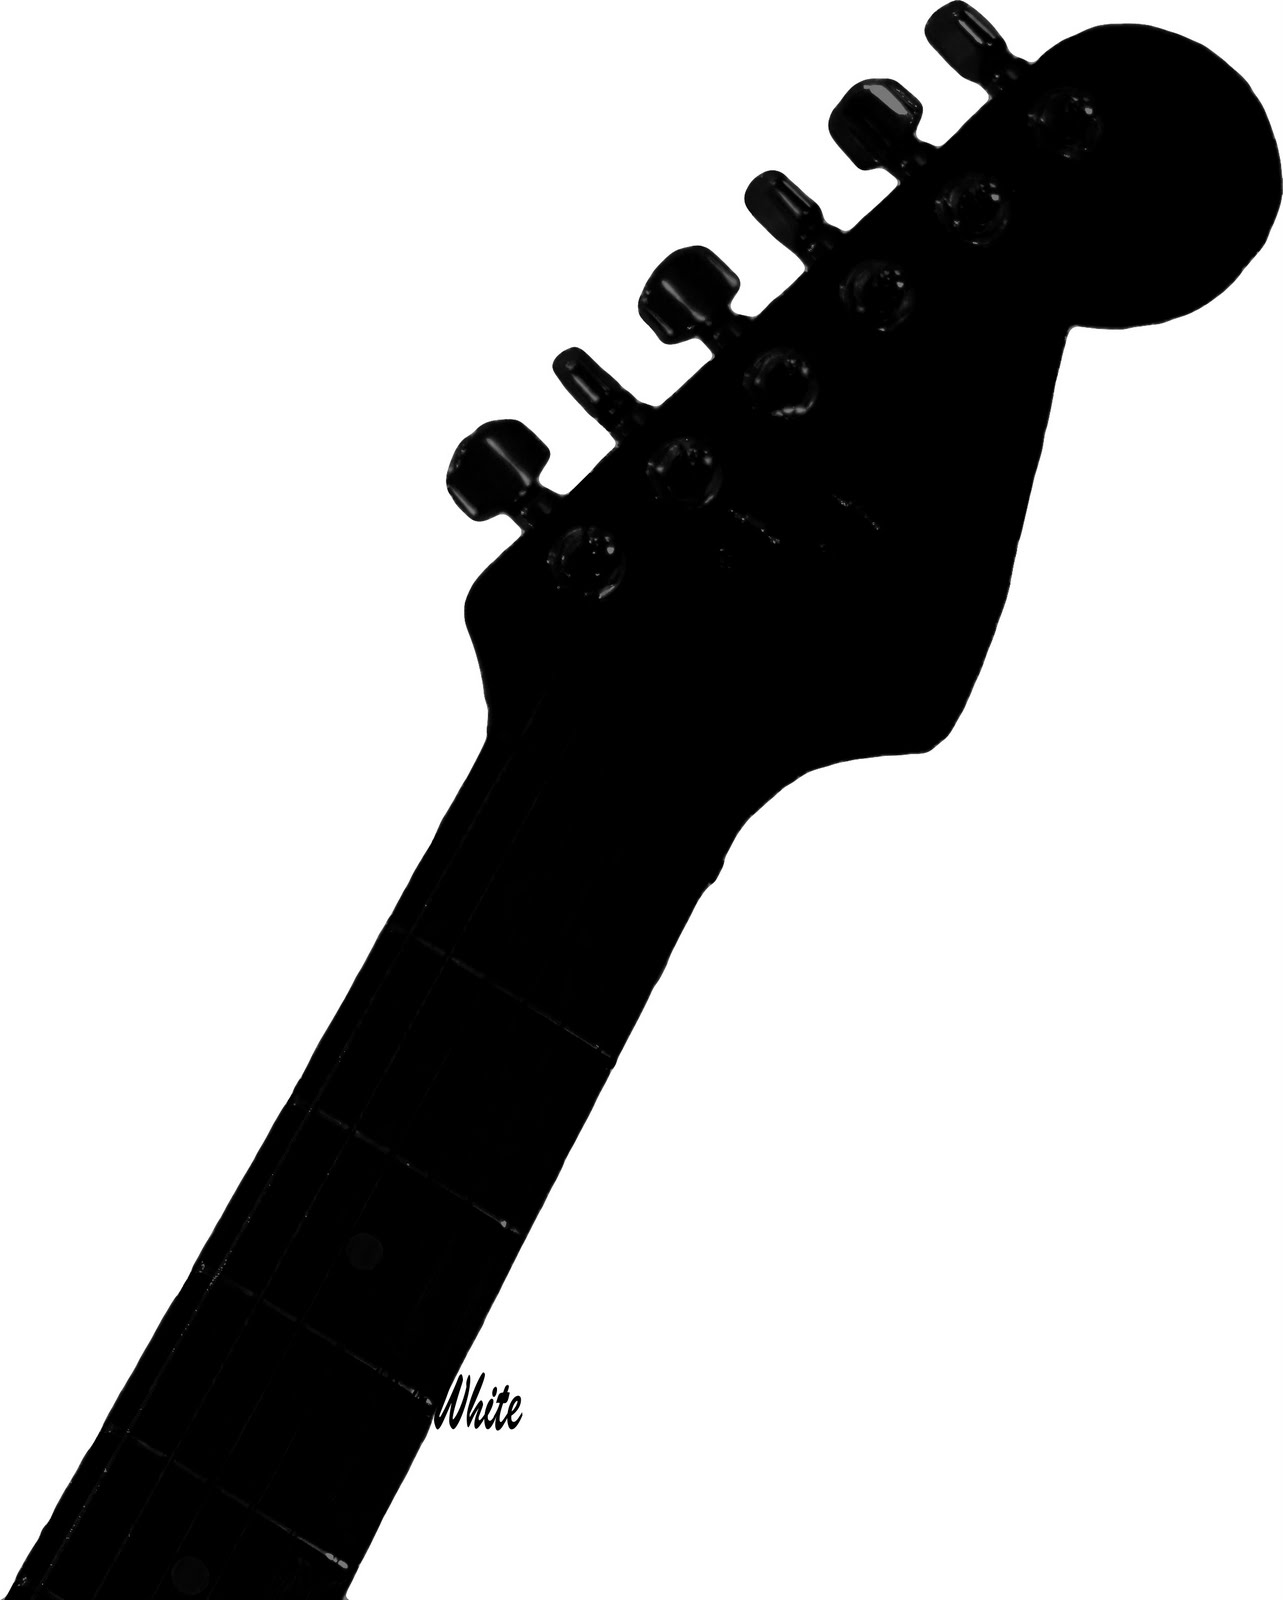 Acoustic Guitar Silhouette Vector Free - Clipart library